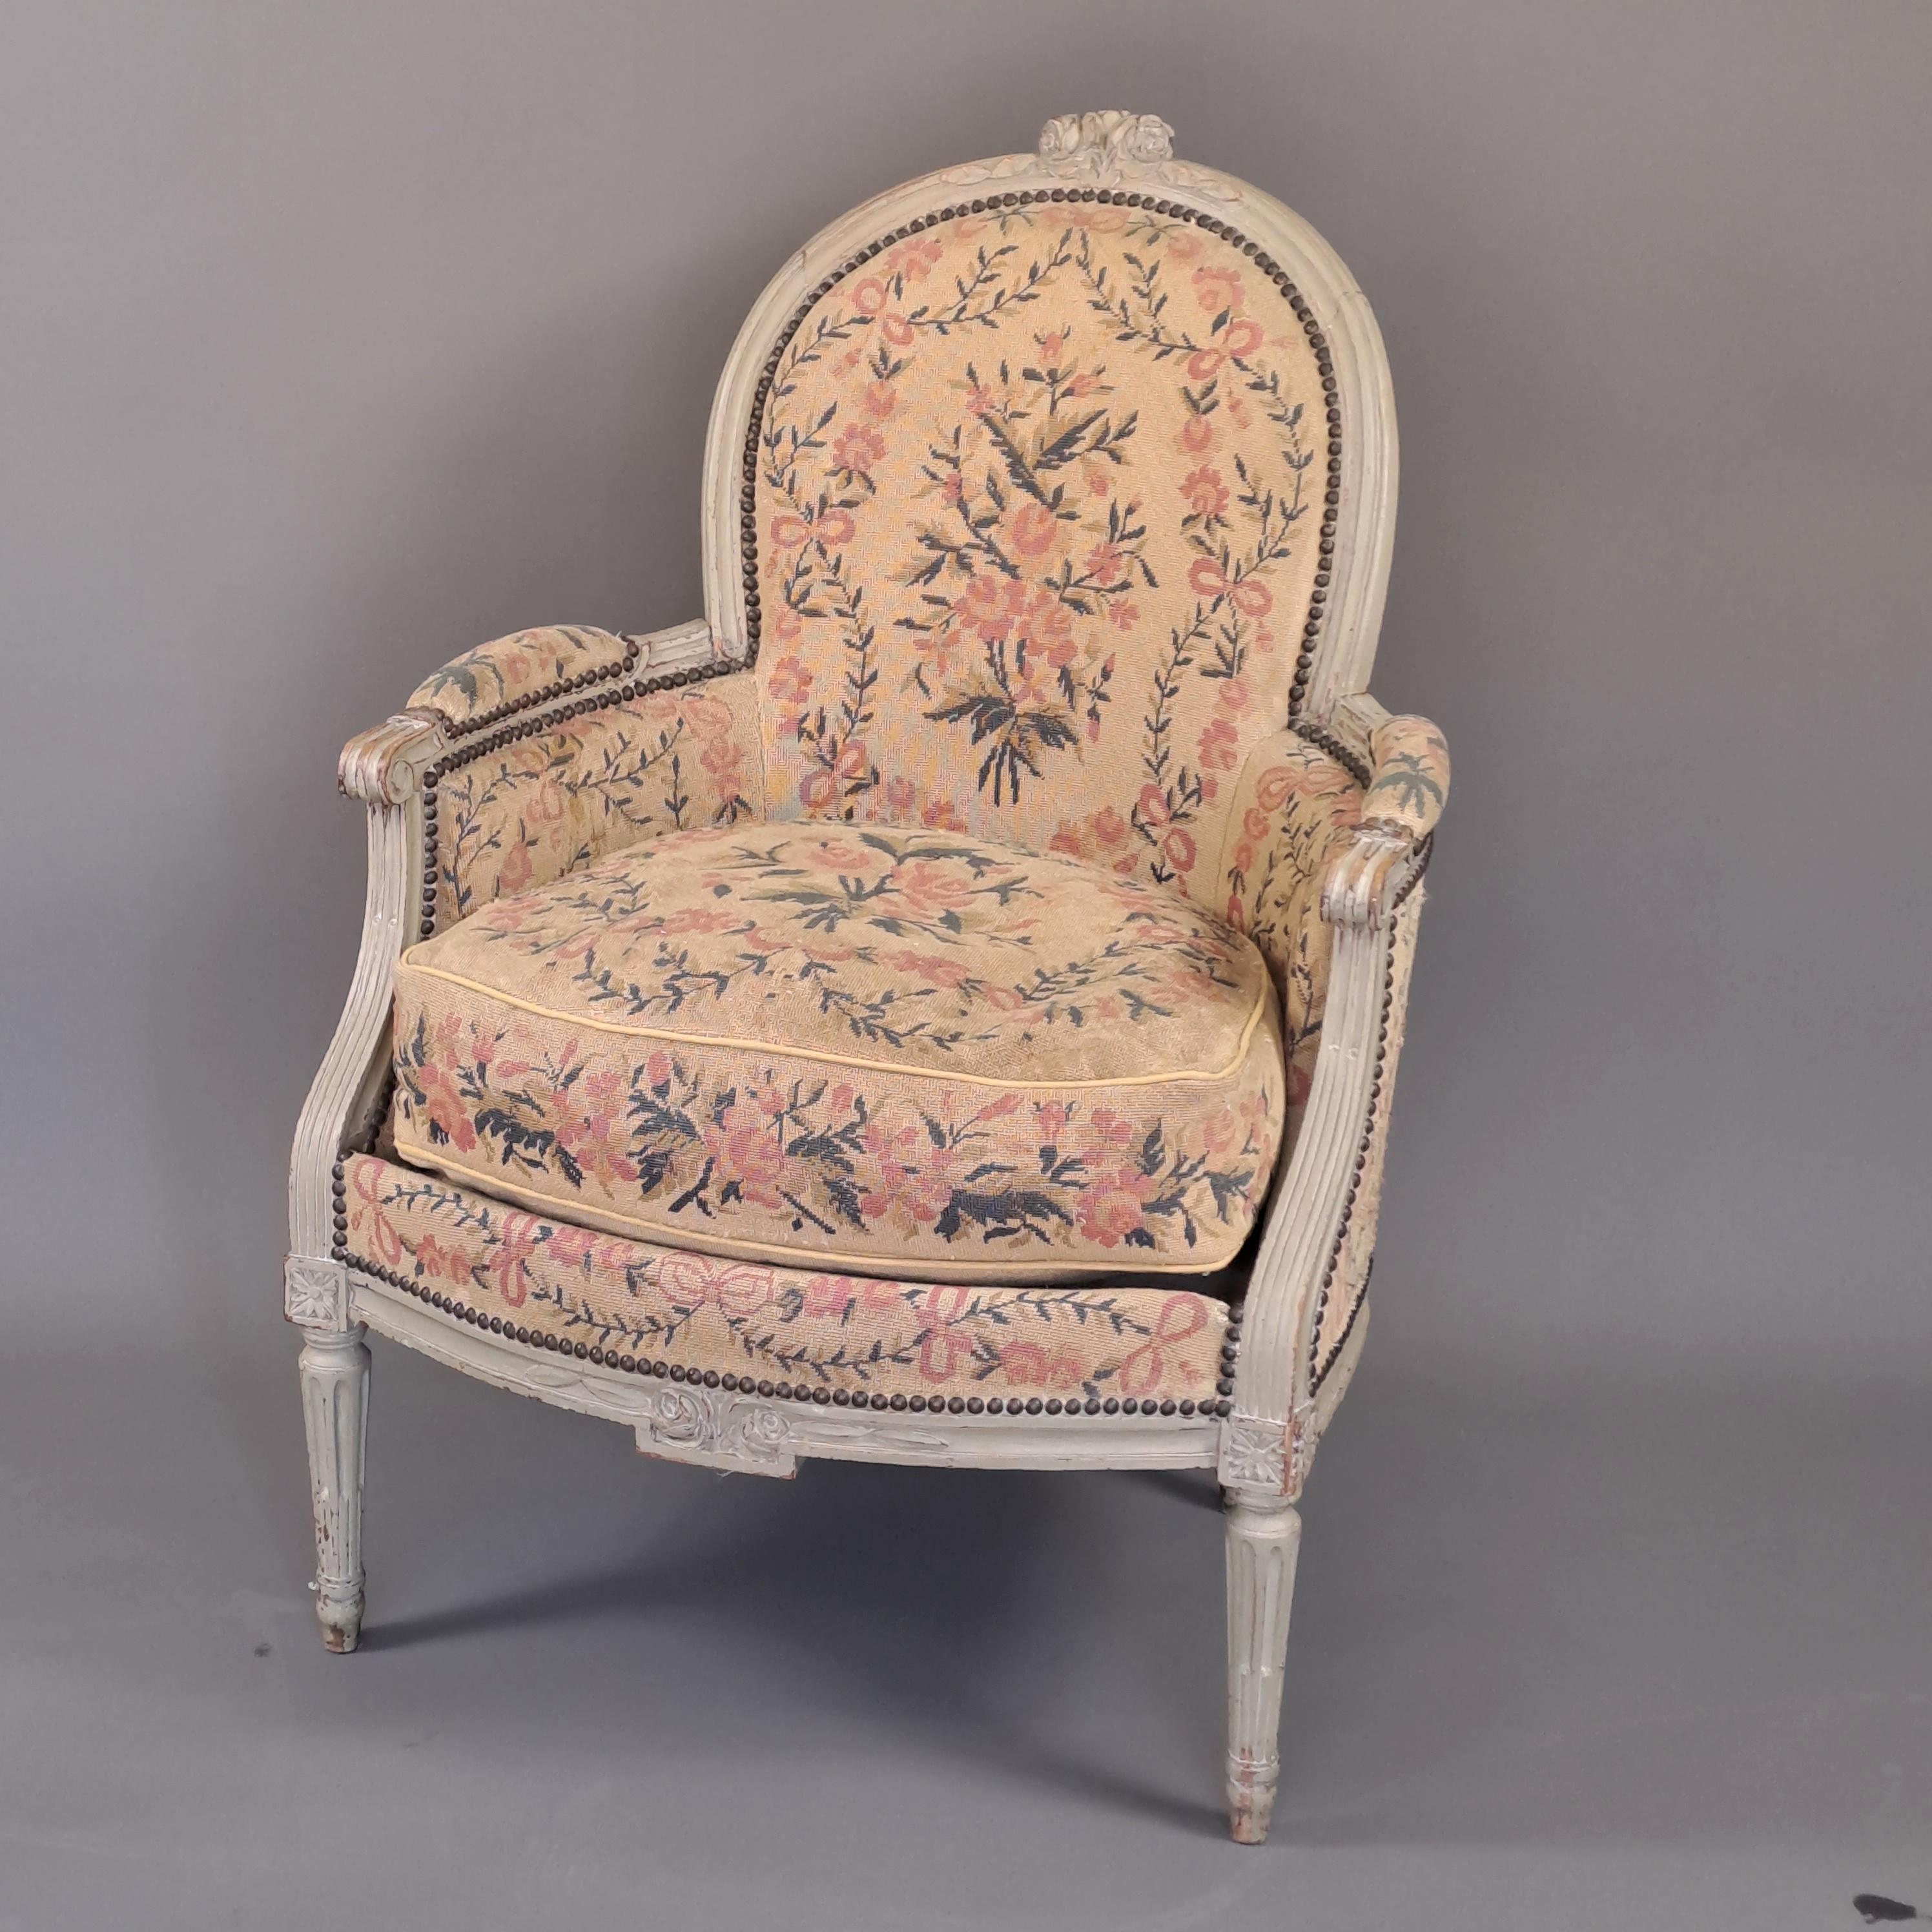 Important Louis XVI period living room furniture in gray lacquered wood. This set is lined with a very beautiful 19th century needlepoint tapestry with polychrome decoration composed of garlands and bouquets of flowers.

Wide and comfortable